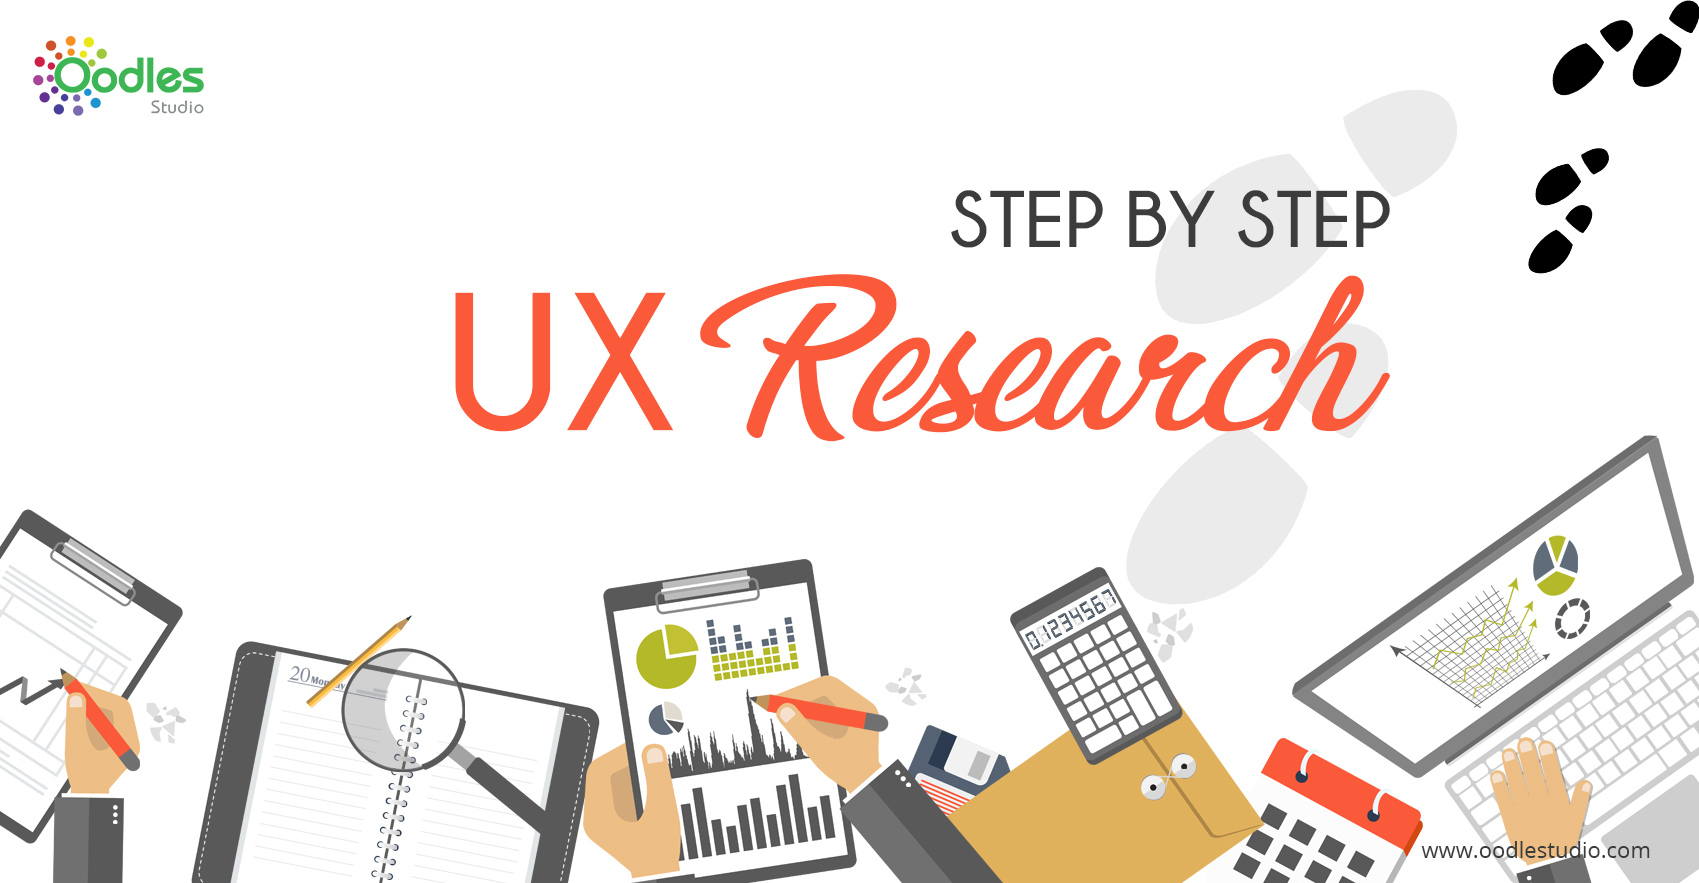 user experience research bedeutung